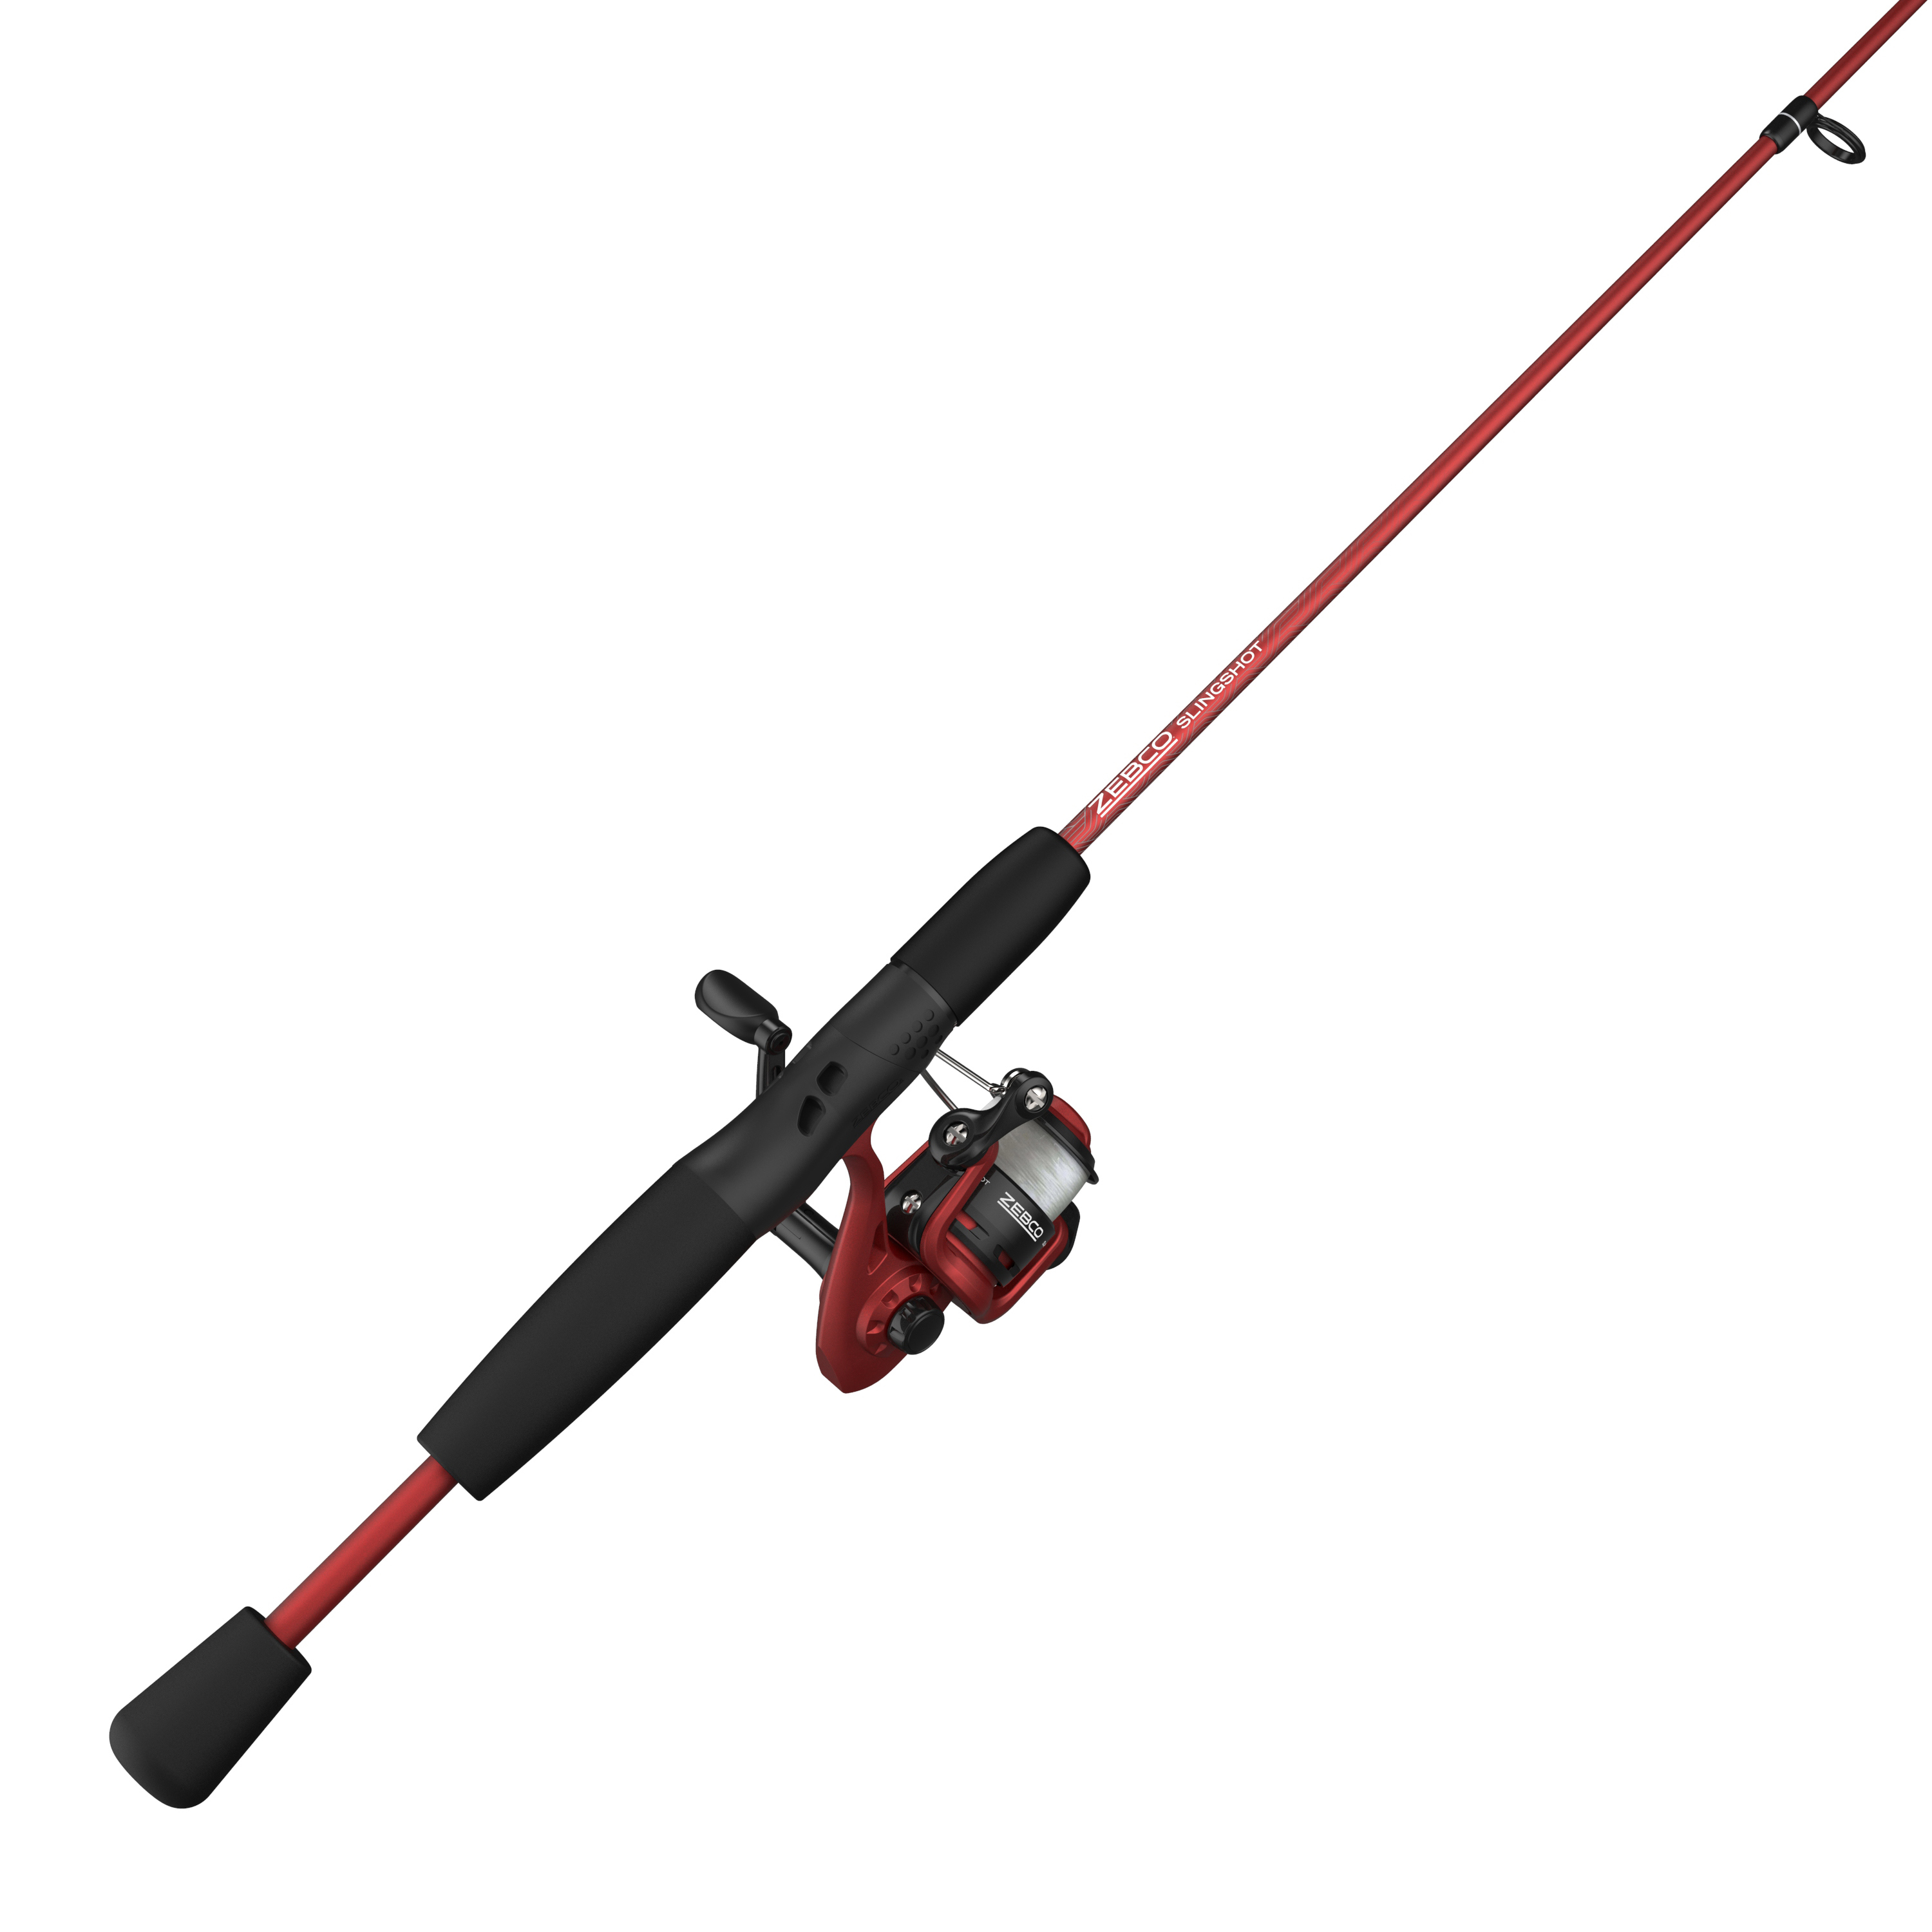 Zebco Spyn Spinning Reel and Fishing Rod Combo, 6-Foot 2-Piece